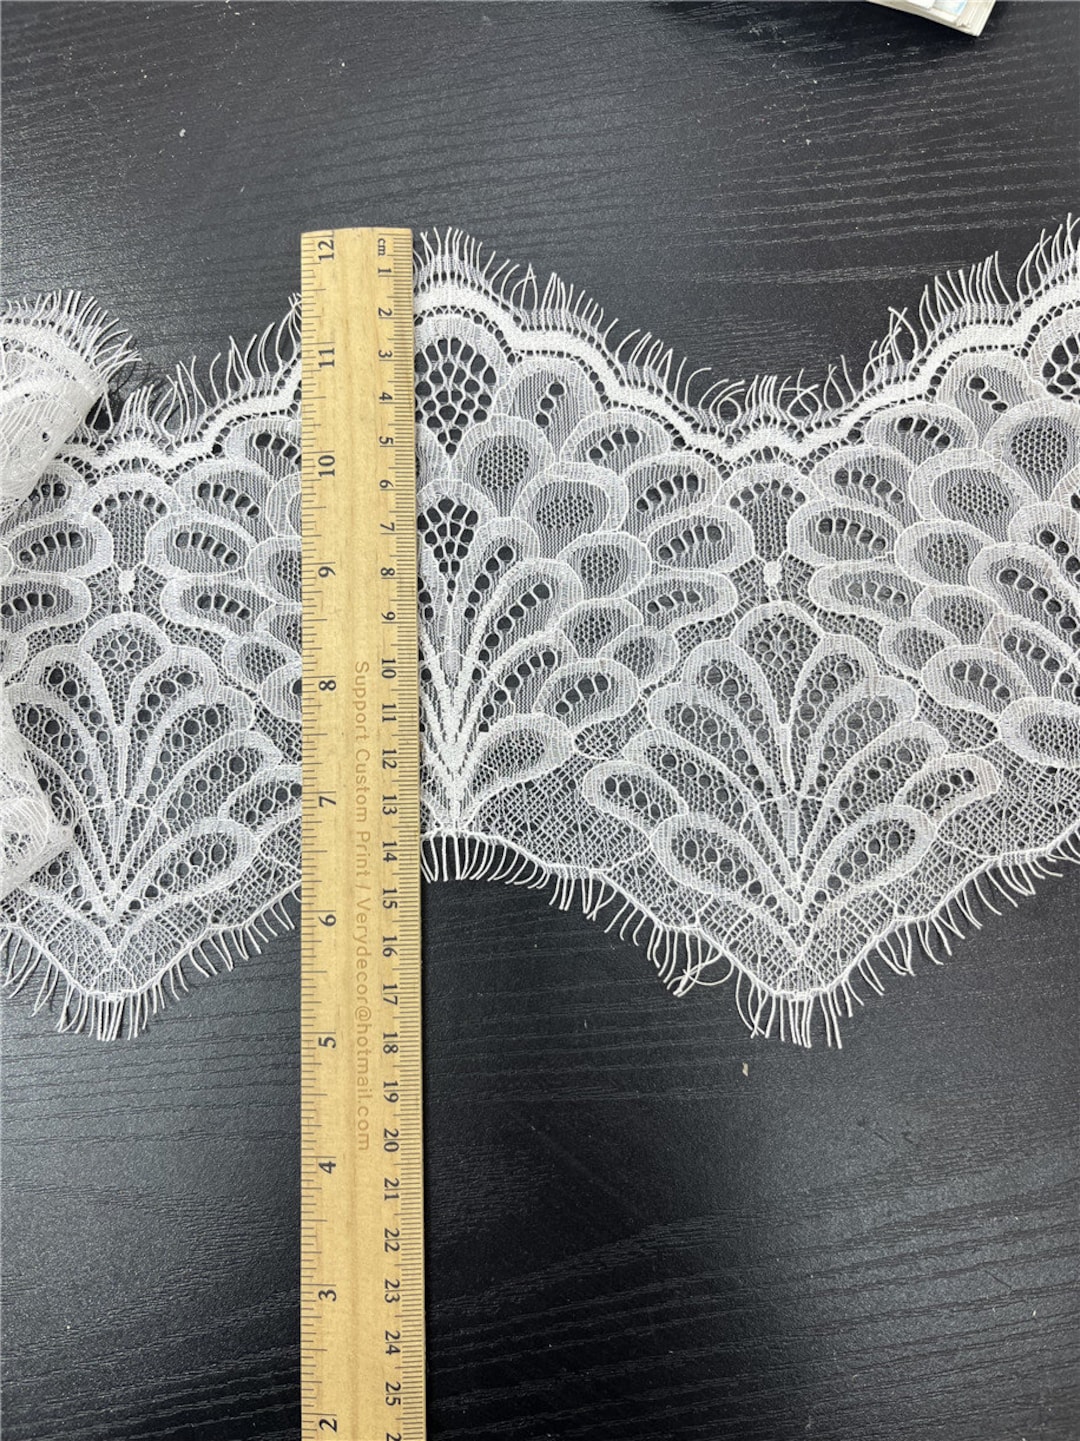 5.9 Inches / 15cm Width Double Eyelash Lace Trim, Ideas for Lingerie,  Weddings, Lingerie Accesorries Price Sold One Panel3yards Connected 